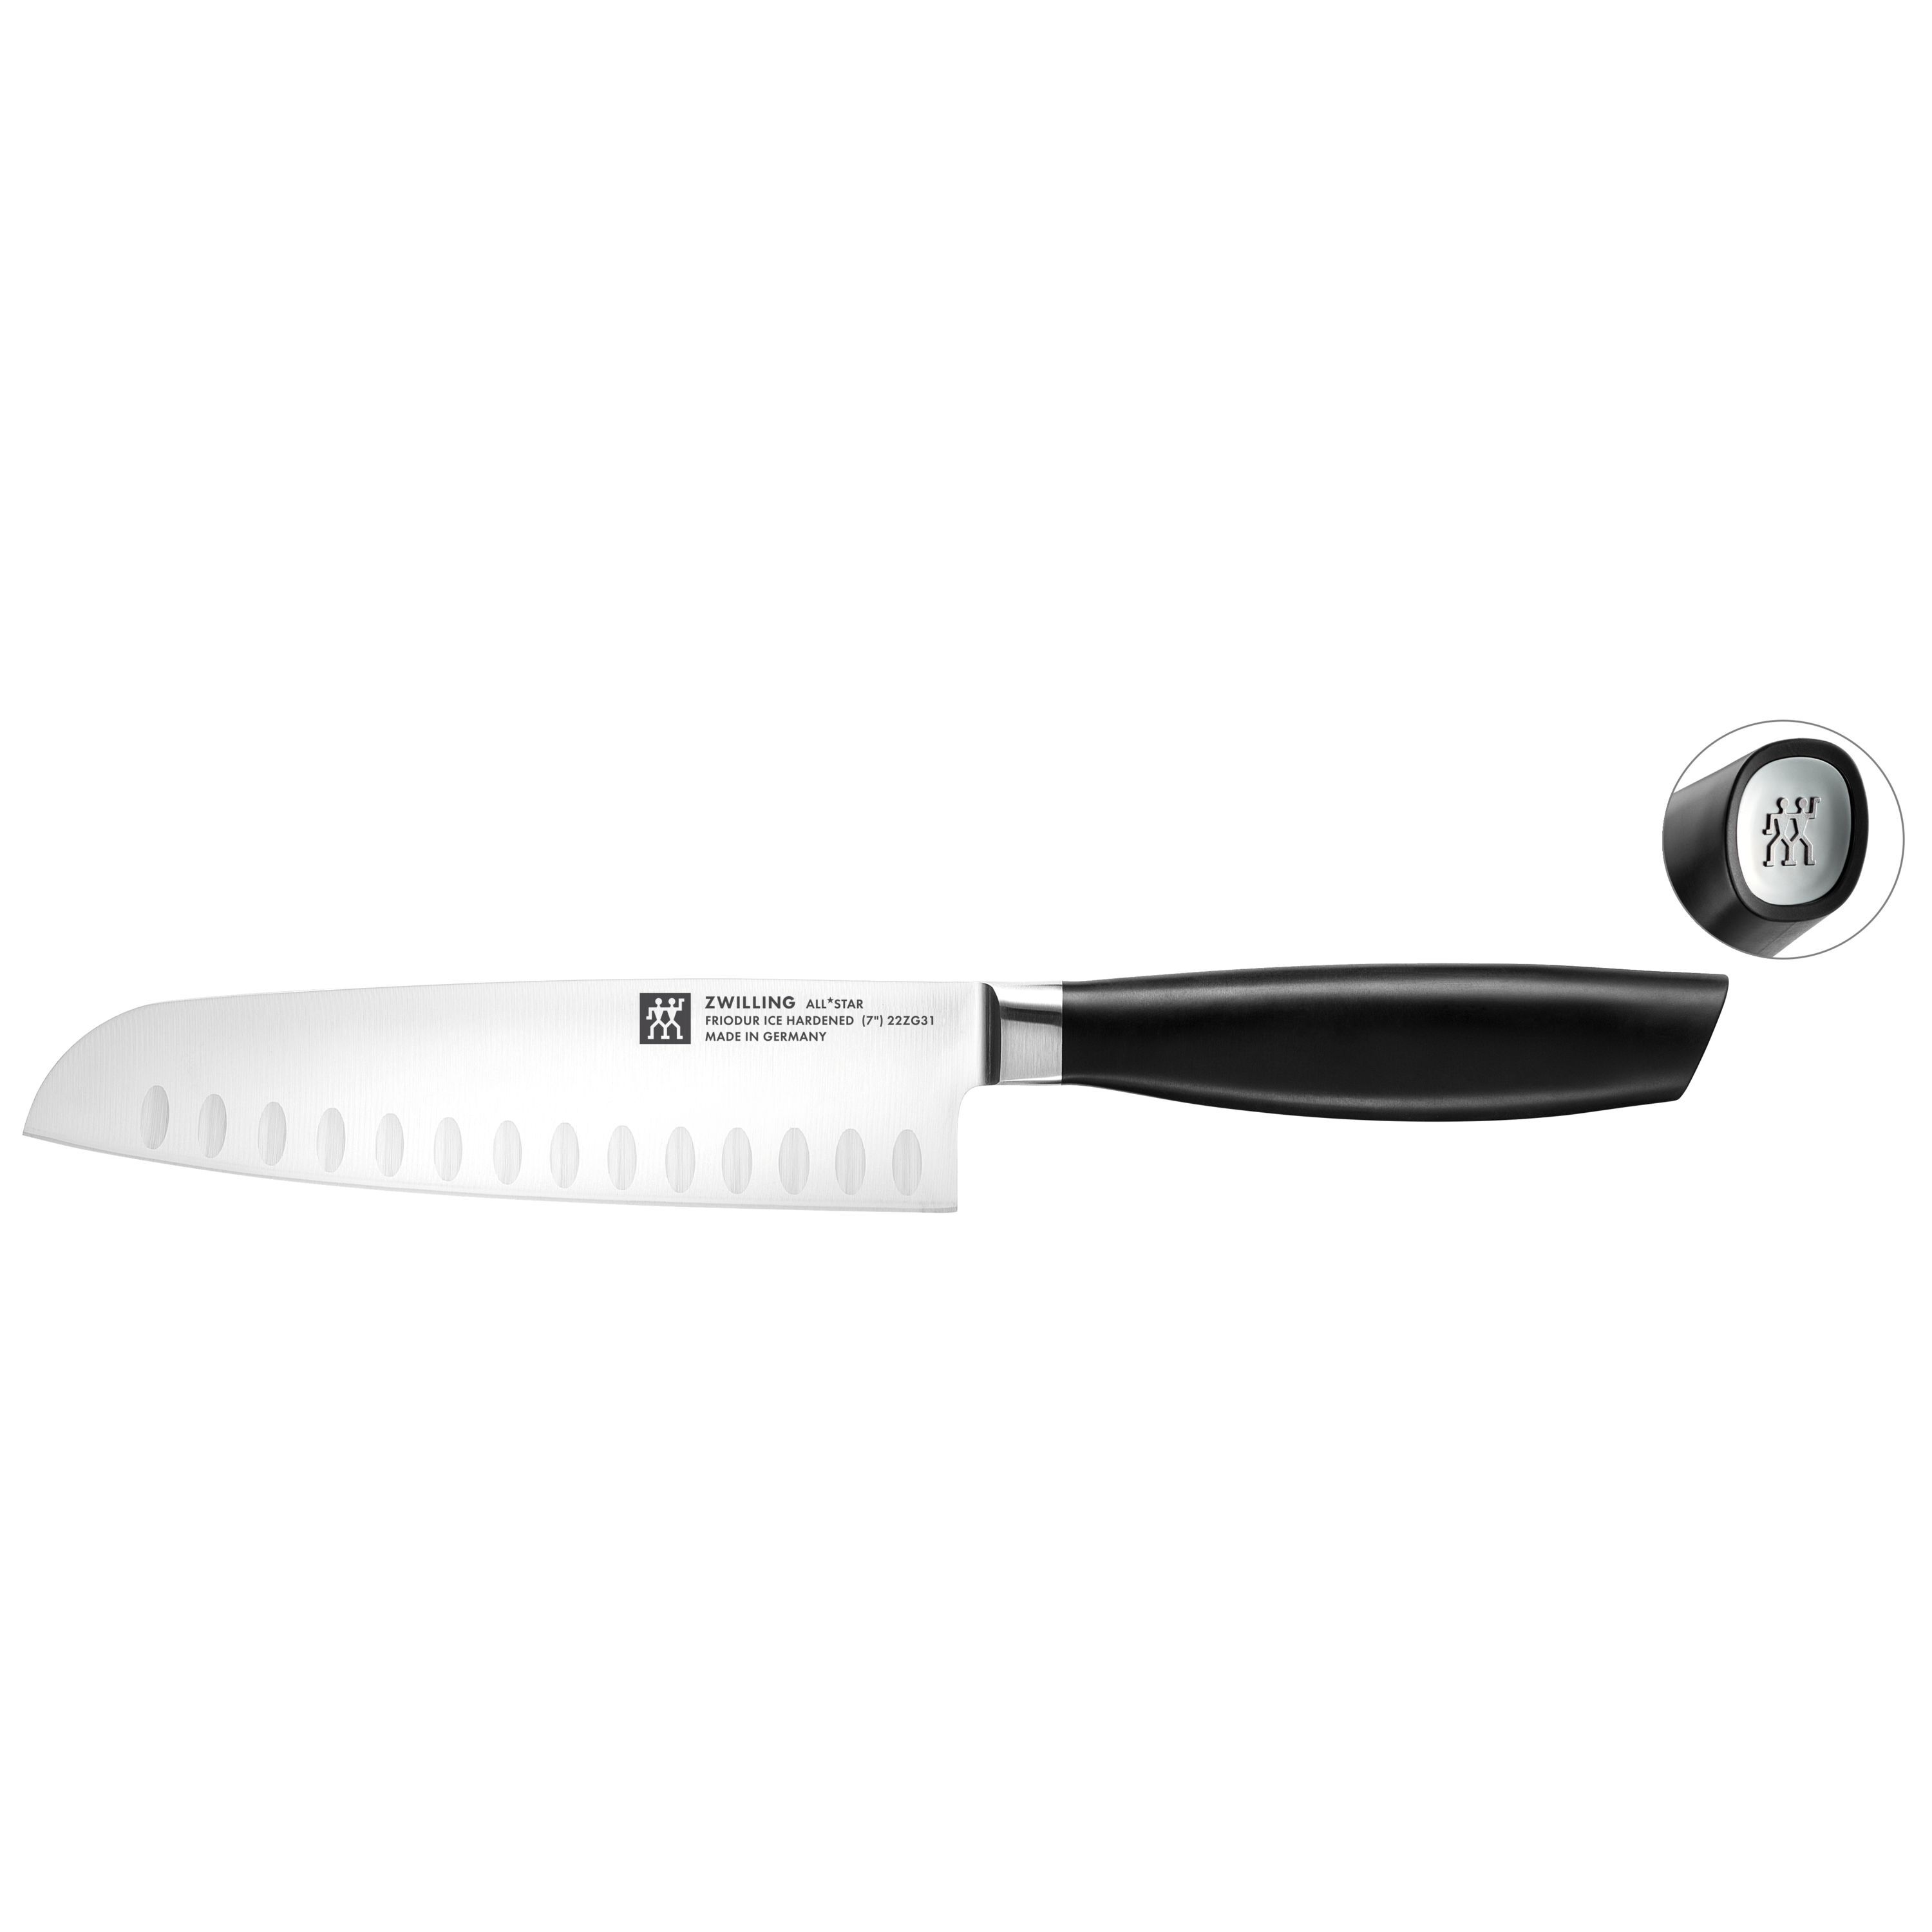 ZWILLING All * Star Couteau santoku 18 cm, Argent